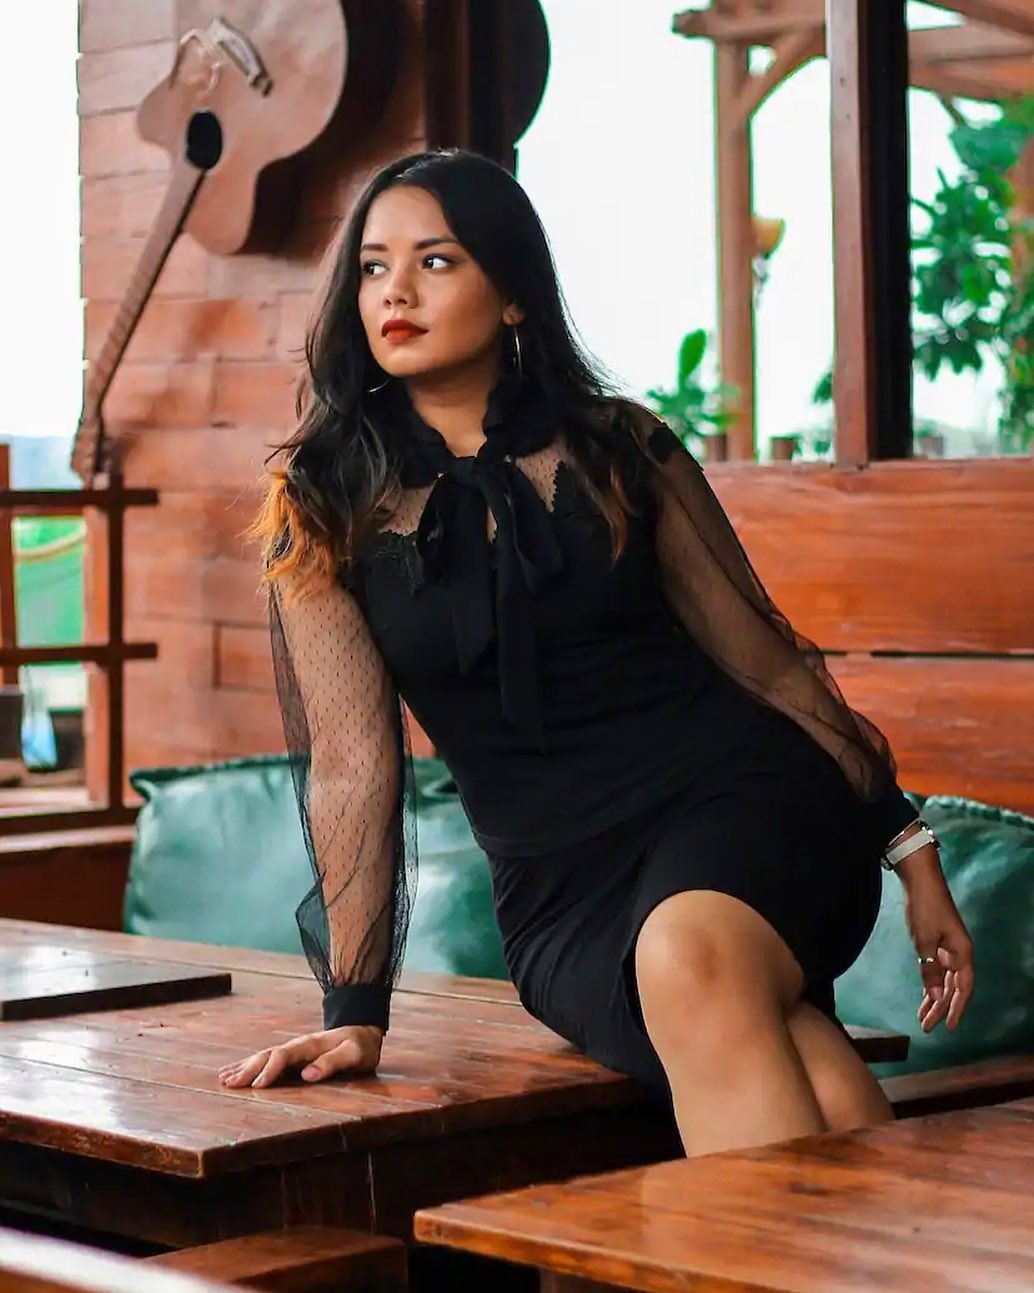 MYNTRA - A little black dress with sheer sleeves is definitely a head turner.
📸 @shubhangi_anand__ 
Look up similiar product code: 6825485 / 11173662 / 12410254 
For more on-point looks, styling hacks...